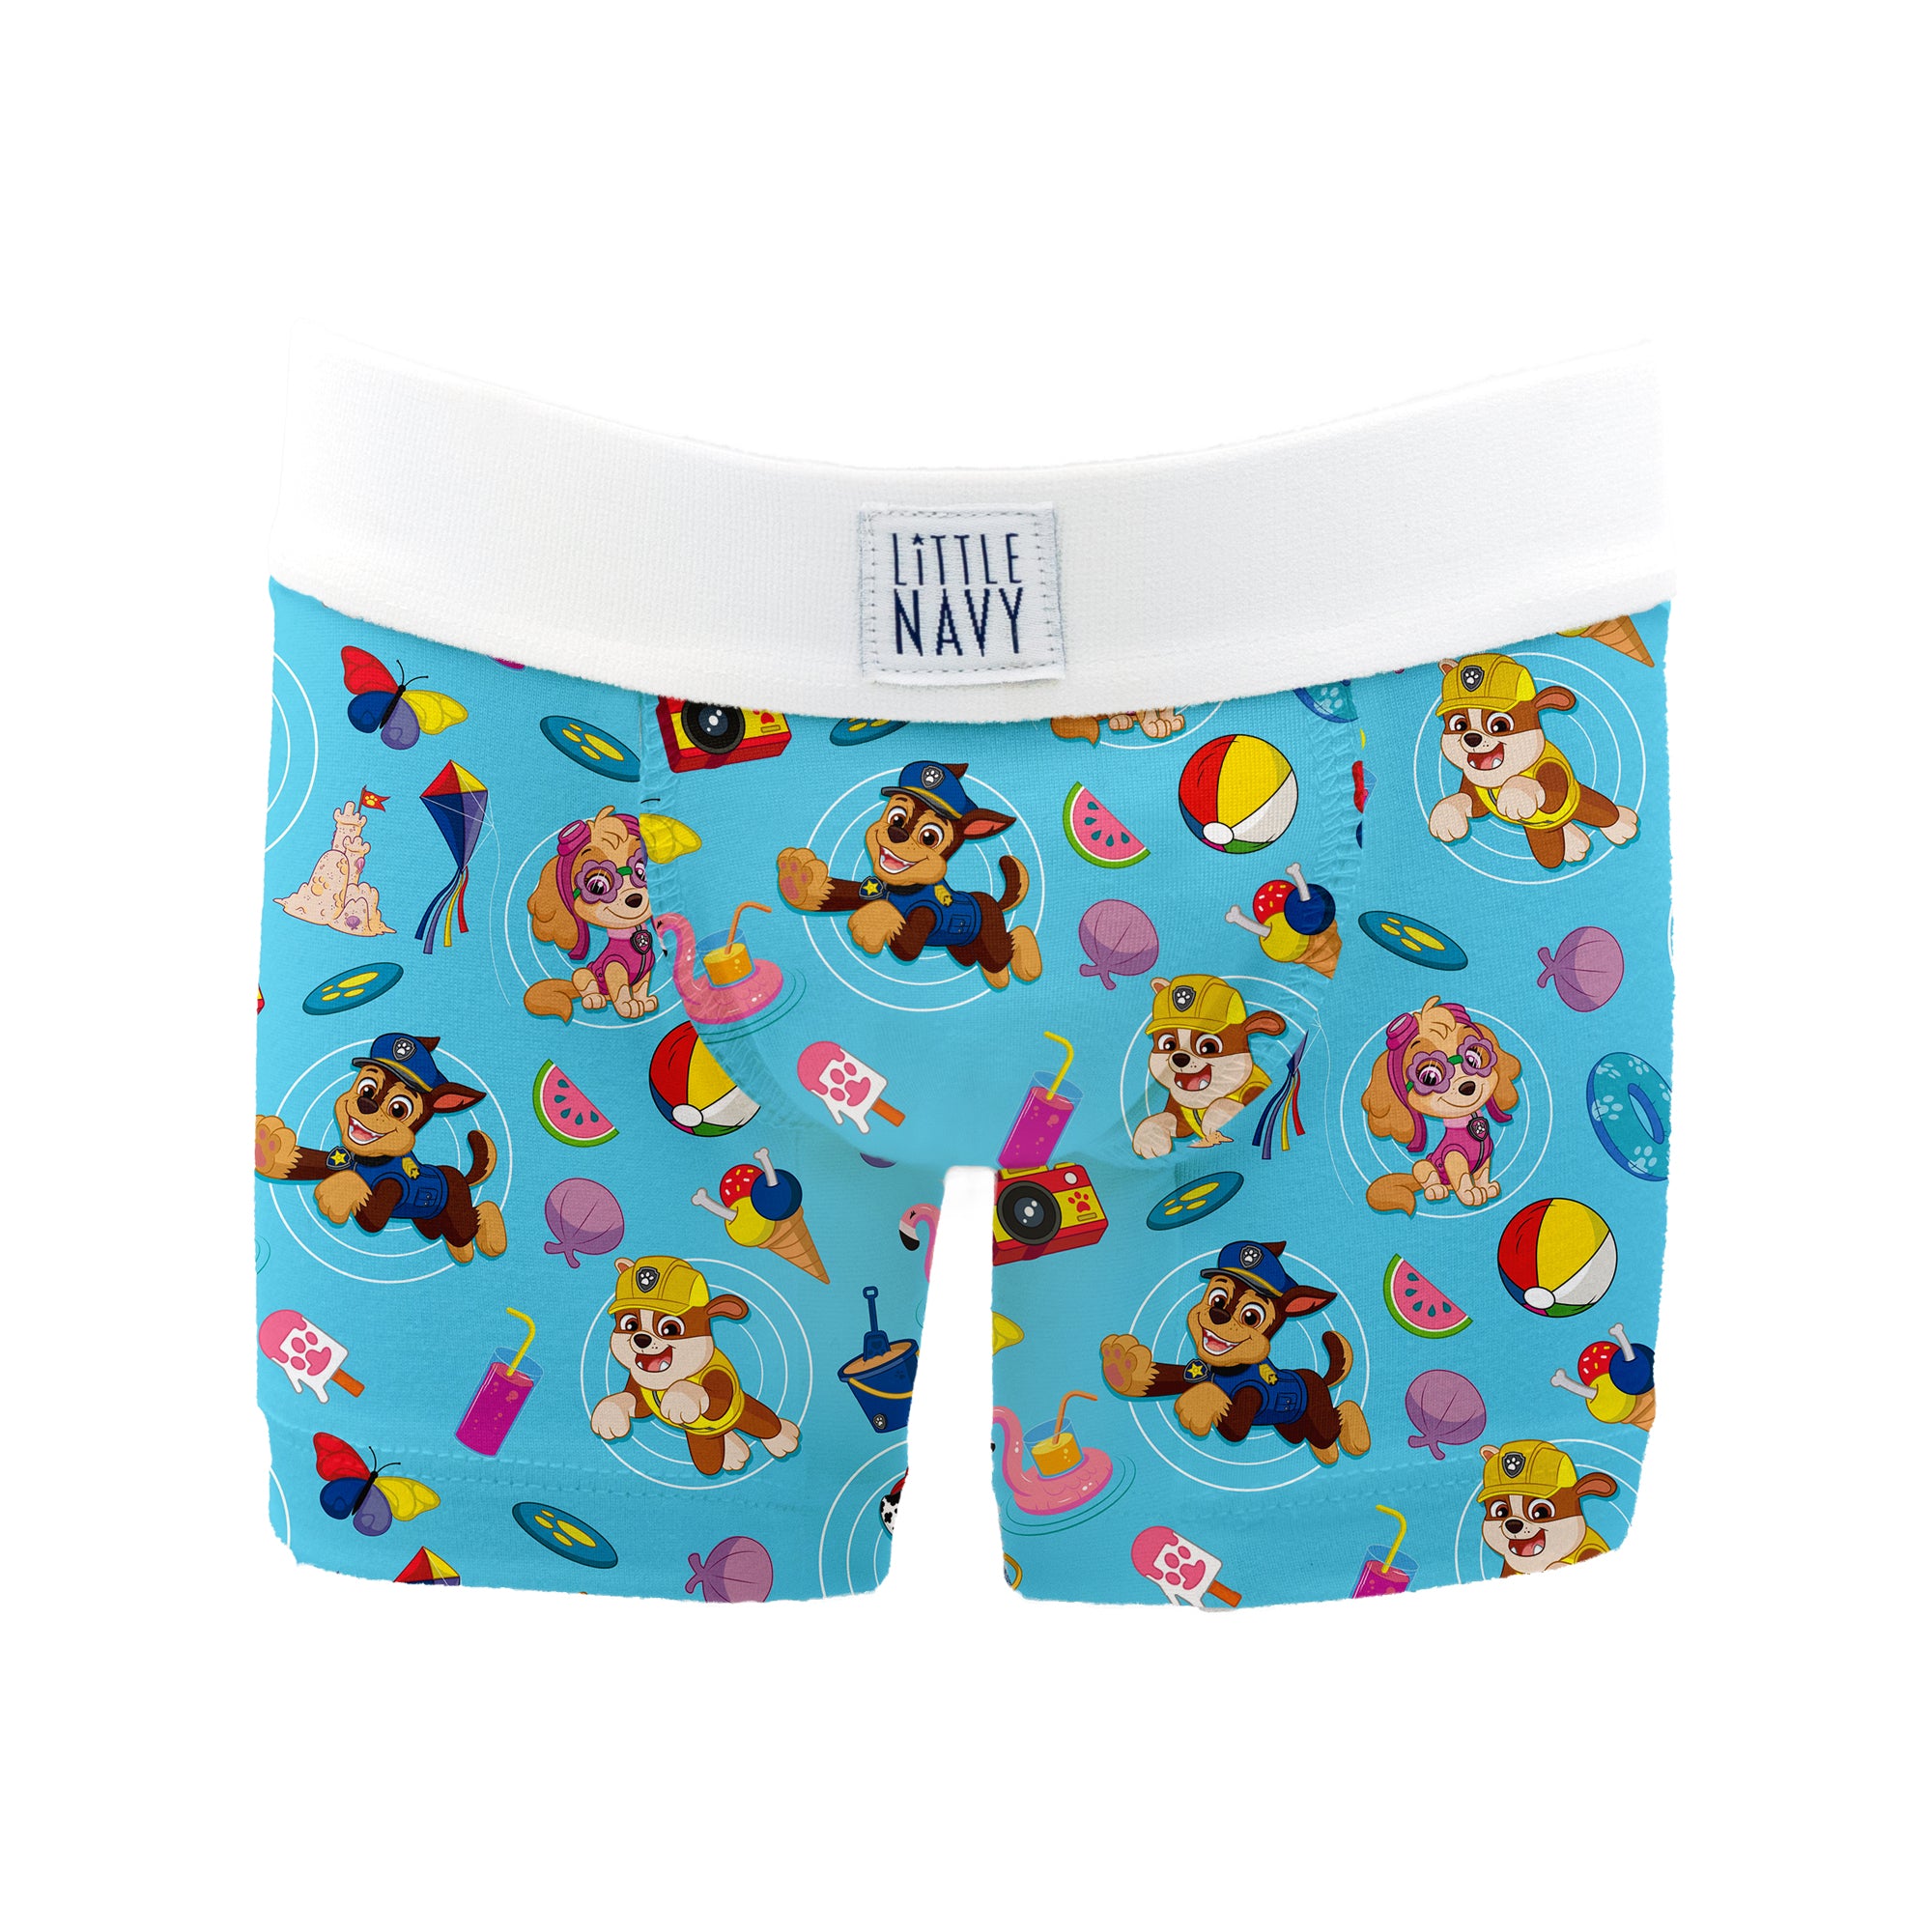 Paw Patrol Kids' Size 6 Blue, Navy & White Briefs With Coloring